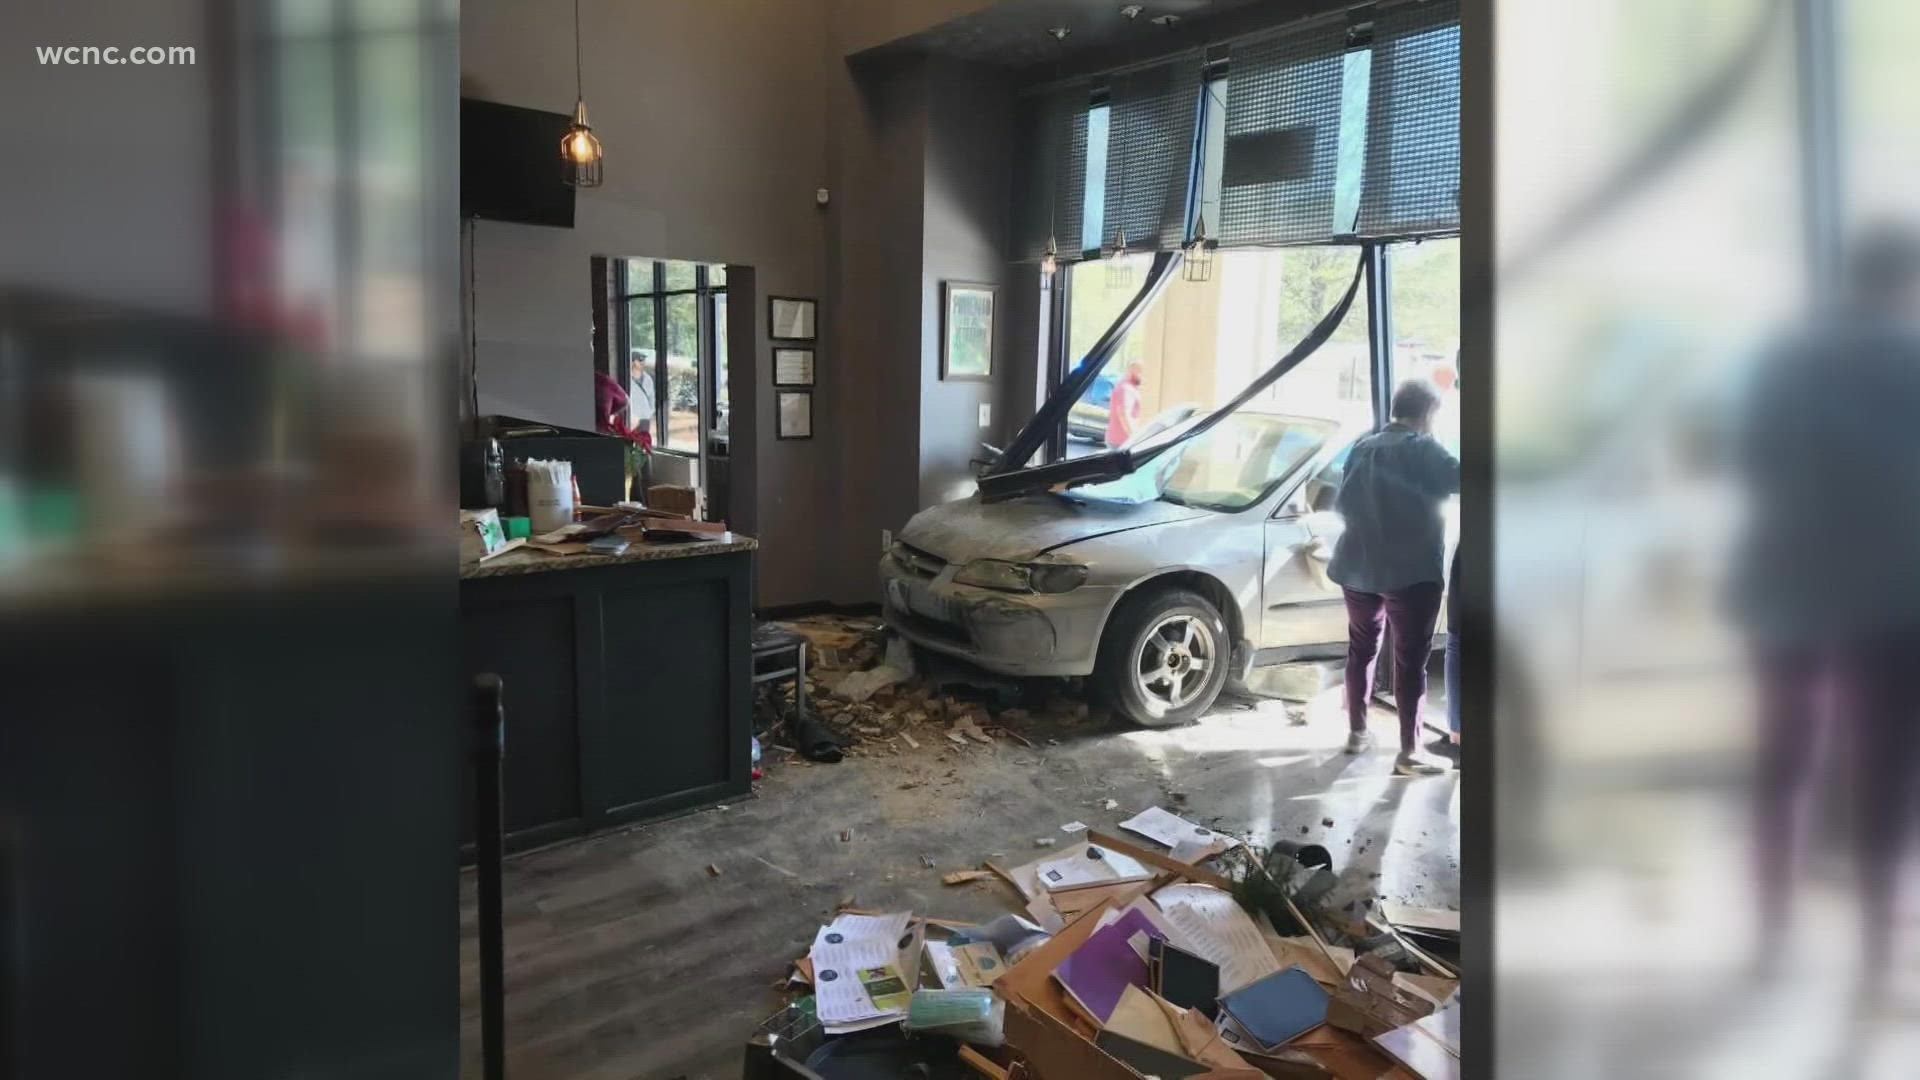 Chaos at a Fort Mill restaurant forced to shut down after a driver has a medical emergency and crashes into the building